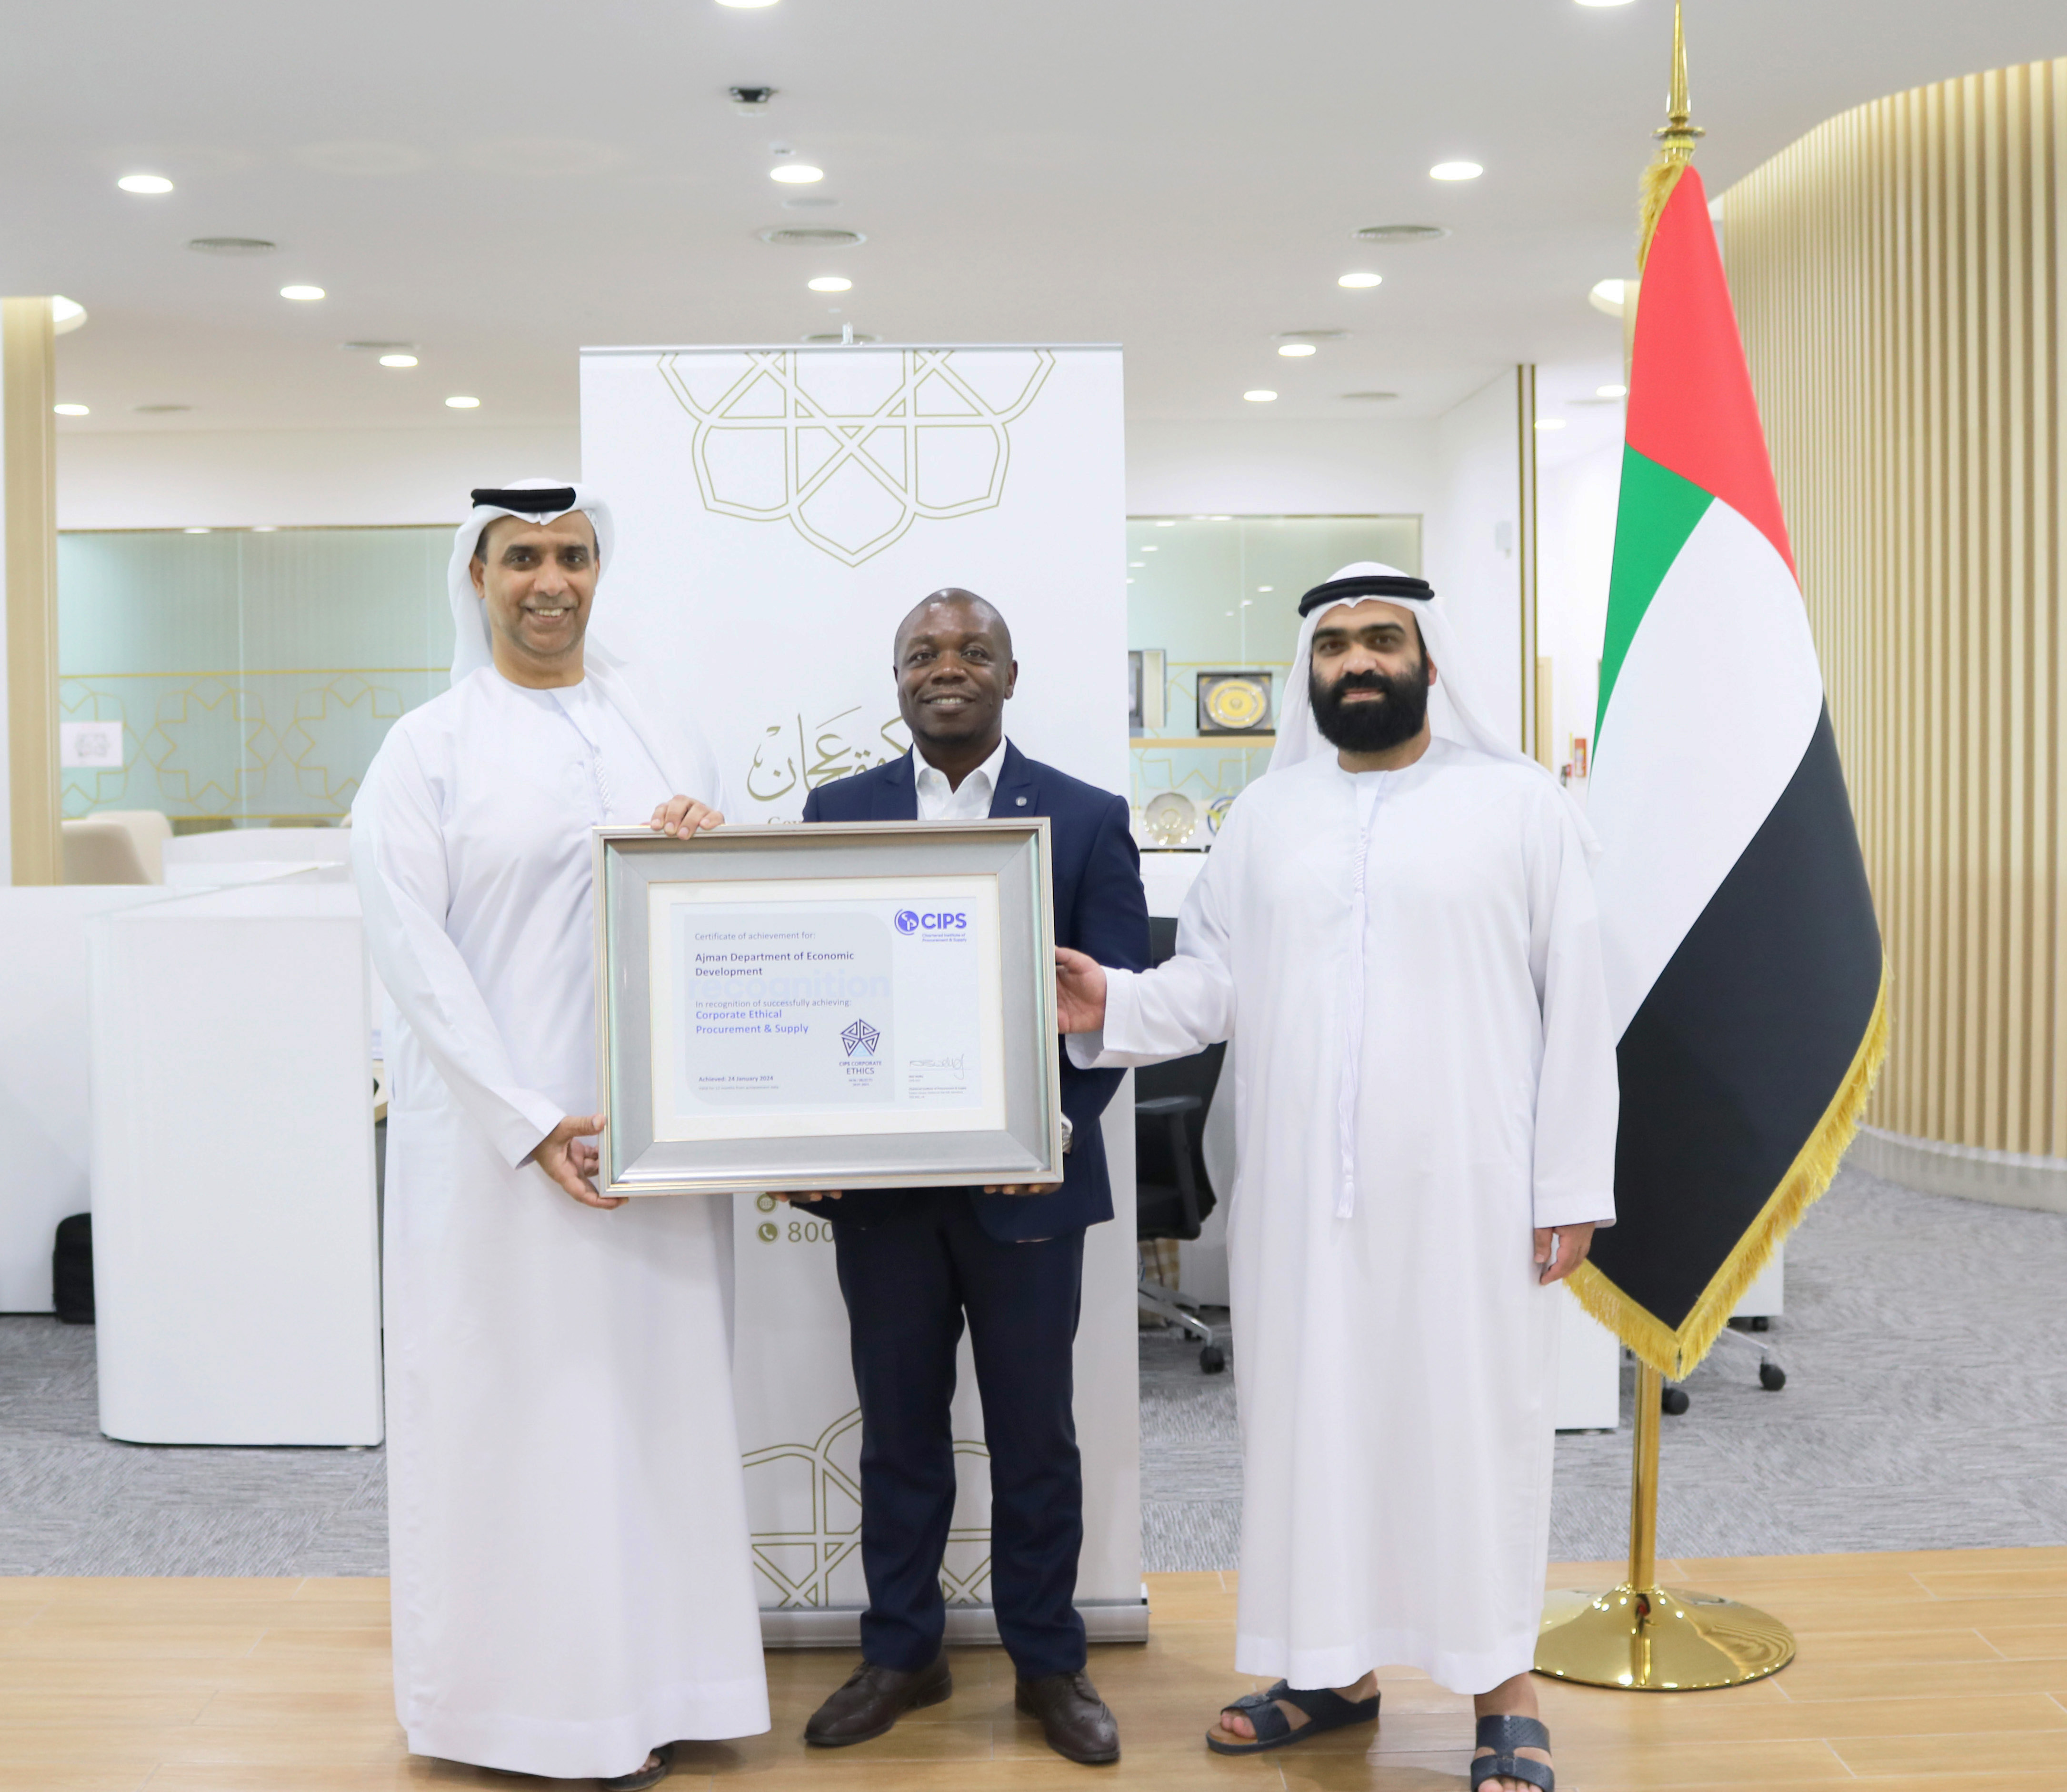 Ajman DED obtains global accreditation from the CIPS as the first entity in Ajman.